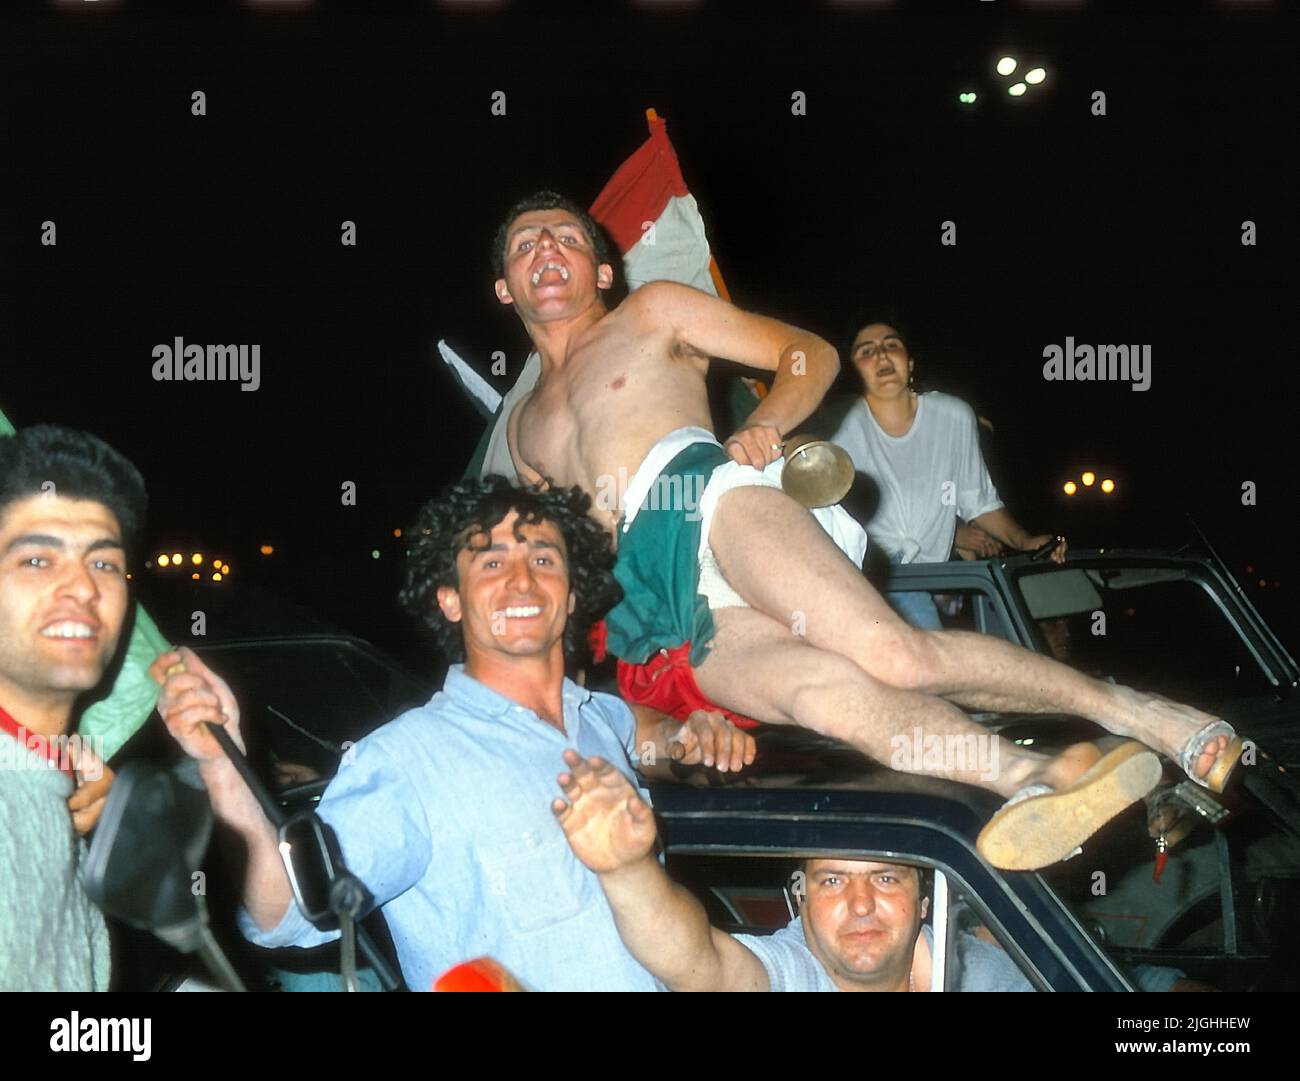 Naples, Italy. July 11, 1982. the Neapolitans celebrate the victory of the Italian soccer team at the soccer world championships held in Spain. The match was played in Madrid. Stock Photo